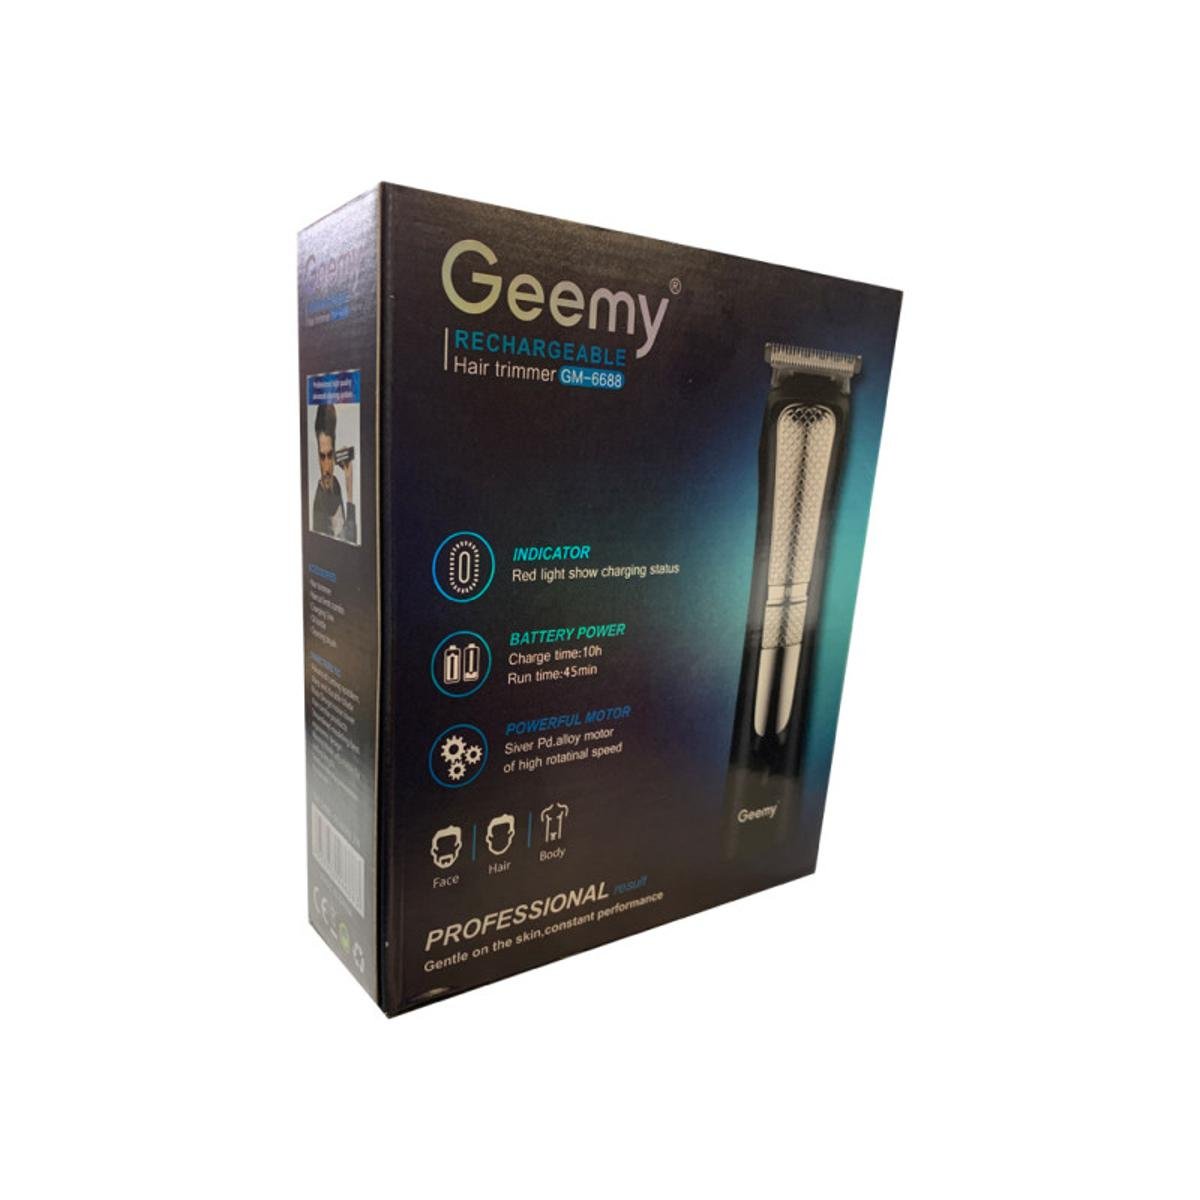 Geemy Rechargeable Hair Trimmer/ Clipper (Gm-6688)